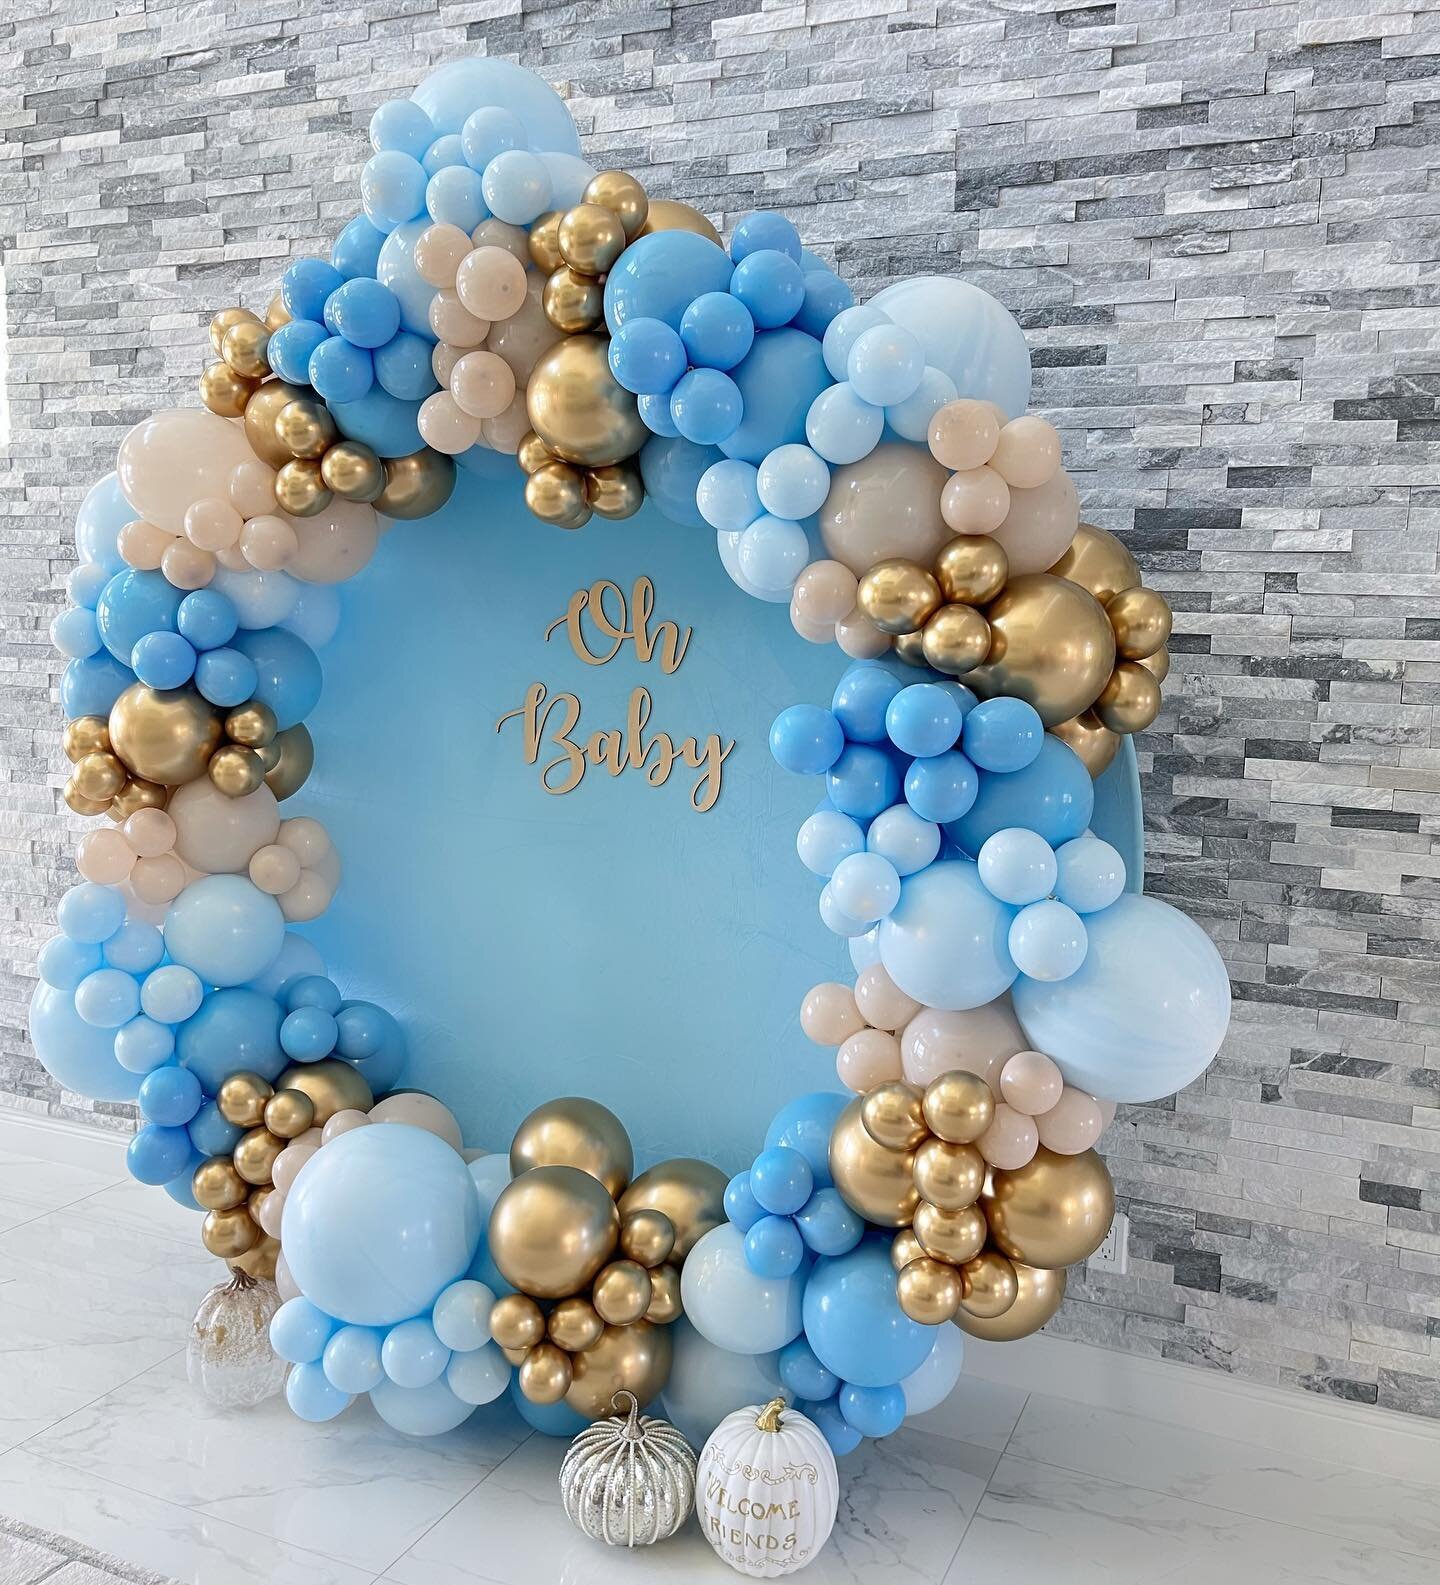 Oh Baby 💙💙💙
Whether you think you can or you think you can&rsquo;t, you right!!! Wait, what 🤯
&bull;
&bull;
&bull;
#balloongarland #babyshowersetup #ohbaby #eventdecor #partyrentalbroward #littlepumpkin #fyp